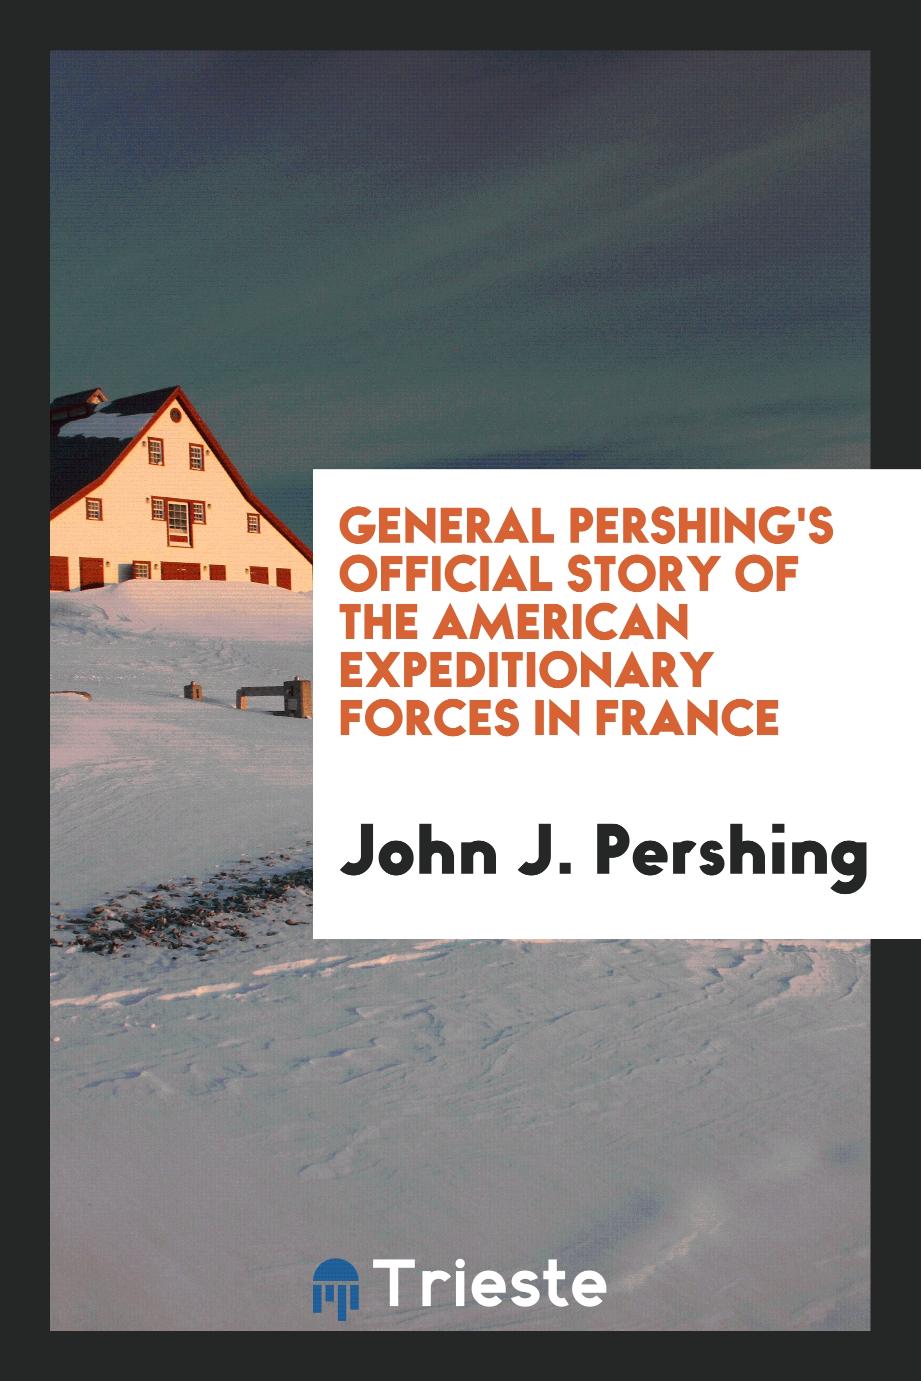 General Pershing's Official Story of the American Expeditionary Forces in France